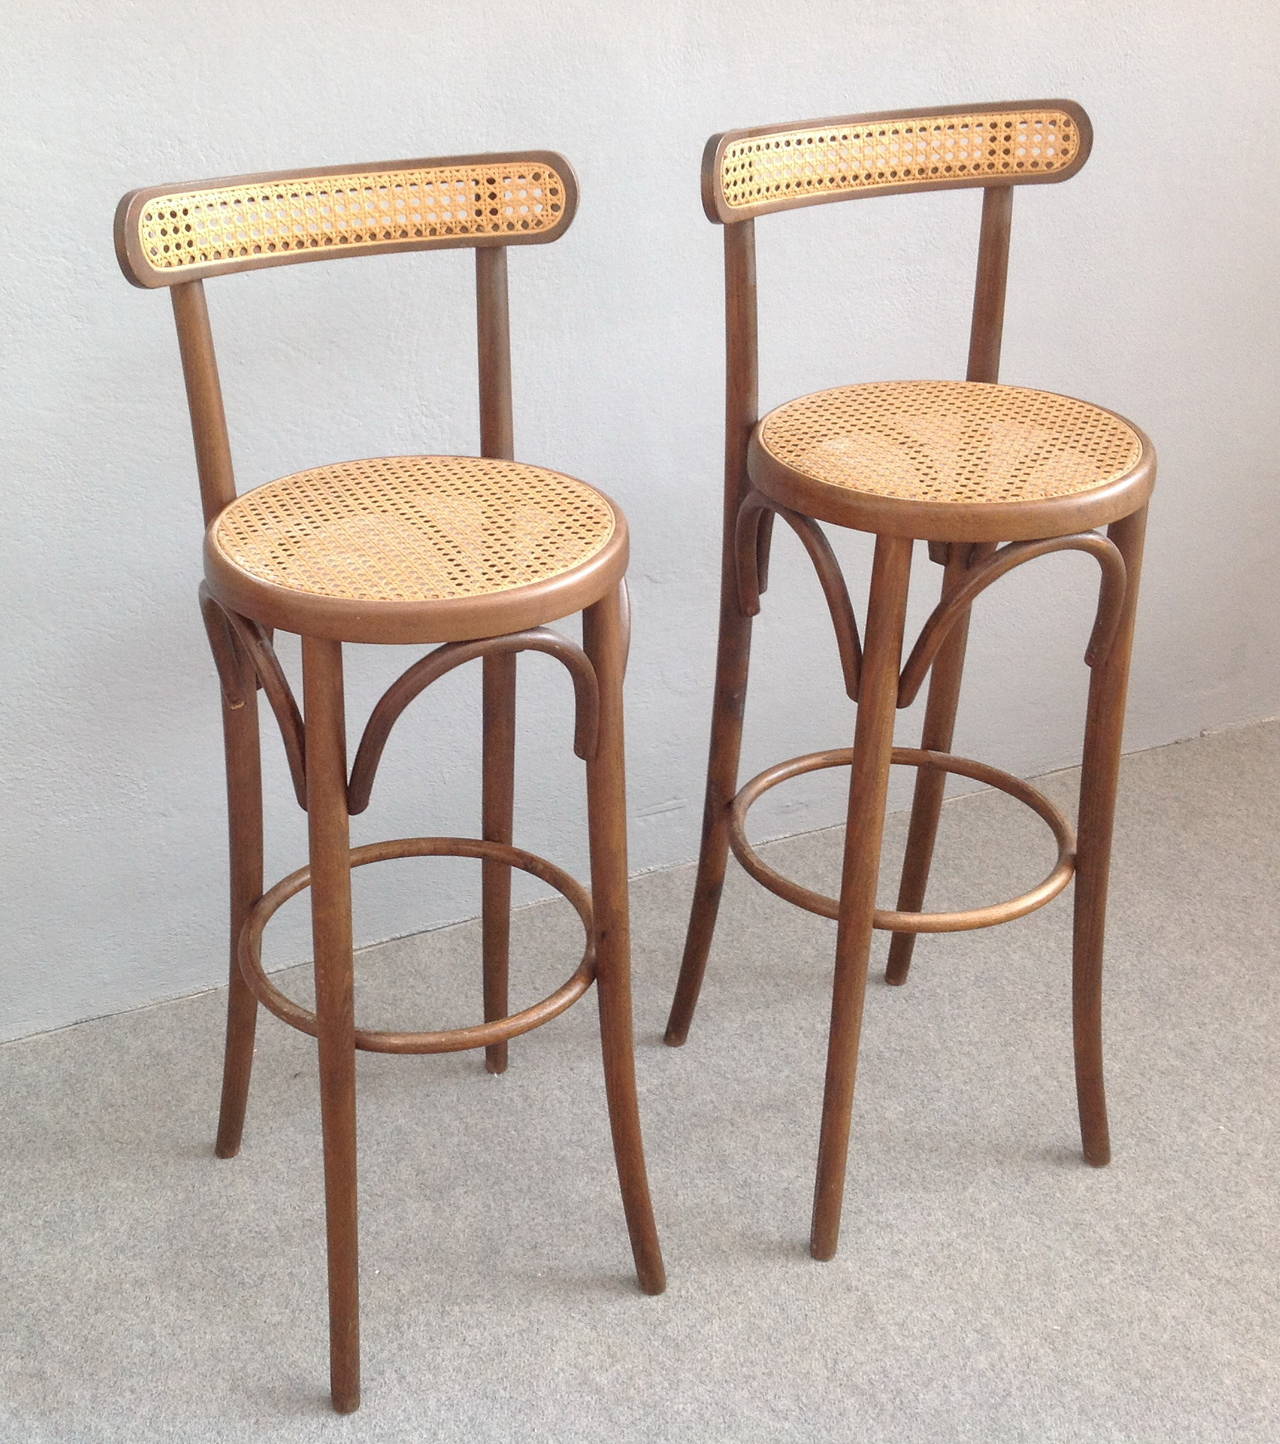 Two Thonet style bar stools. Bentwood and original cane seat and back.